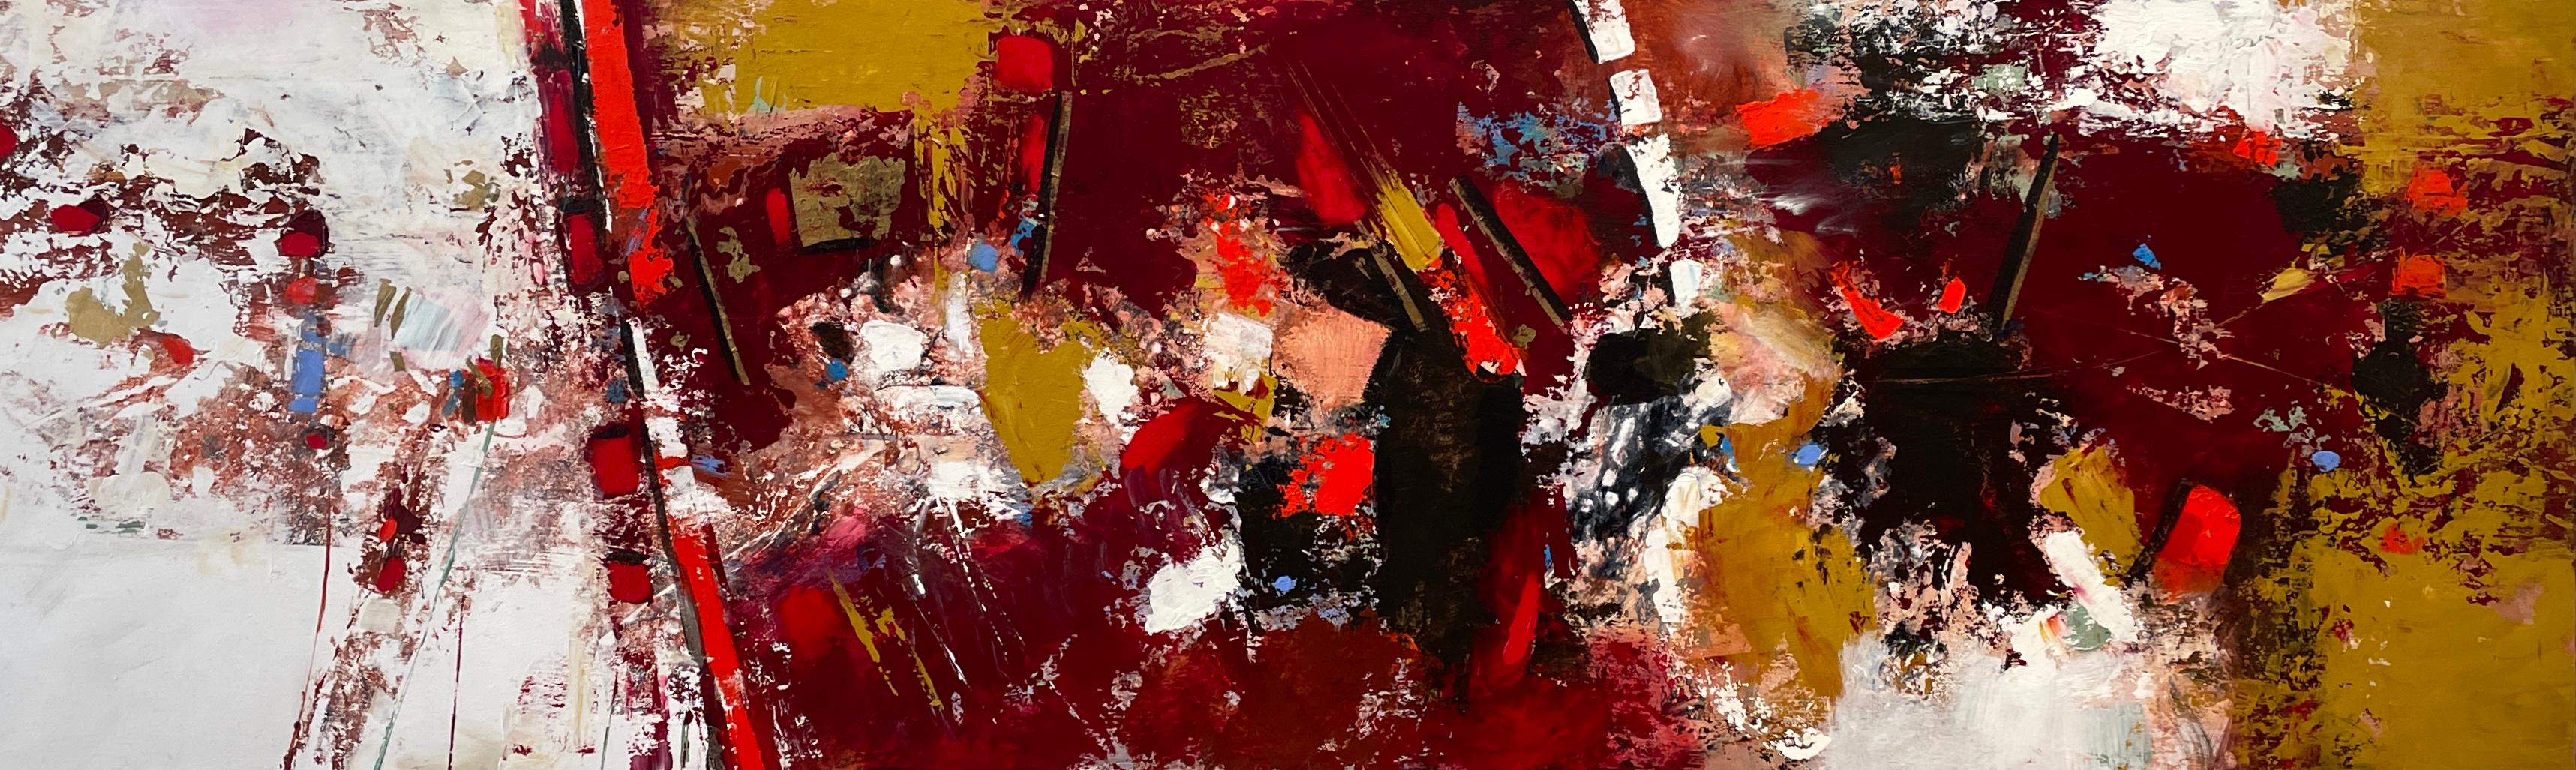 Mary Titus's "Crosswalk" is a 24" x 78" mixed media on wood panel that engages the viewer with its abstract interpretation of urban motion. The piece uses a striking array of colors—bold reds and deep maroons intermingle with splashes of white,